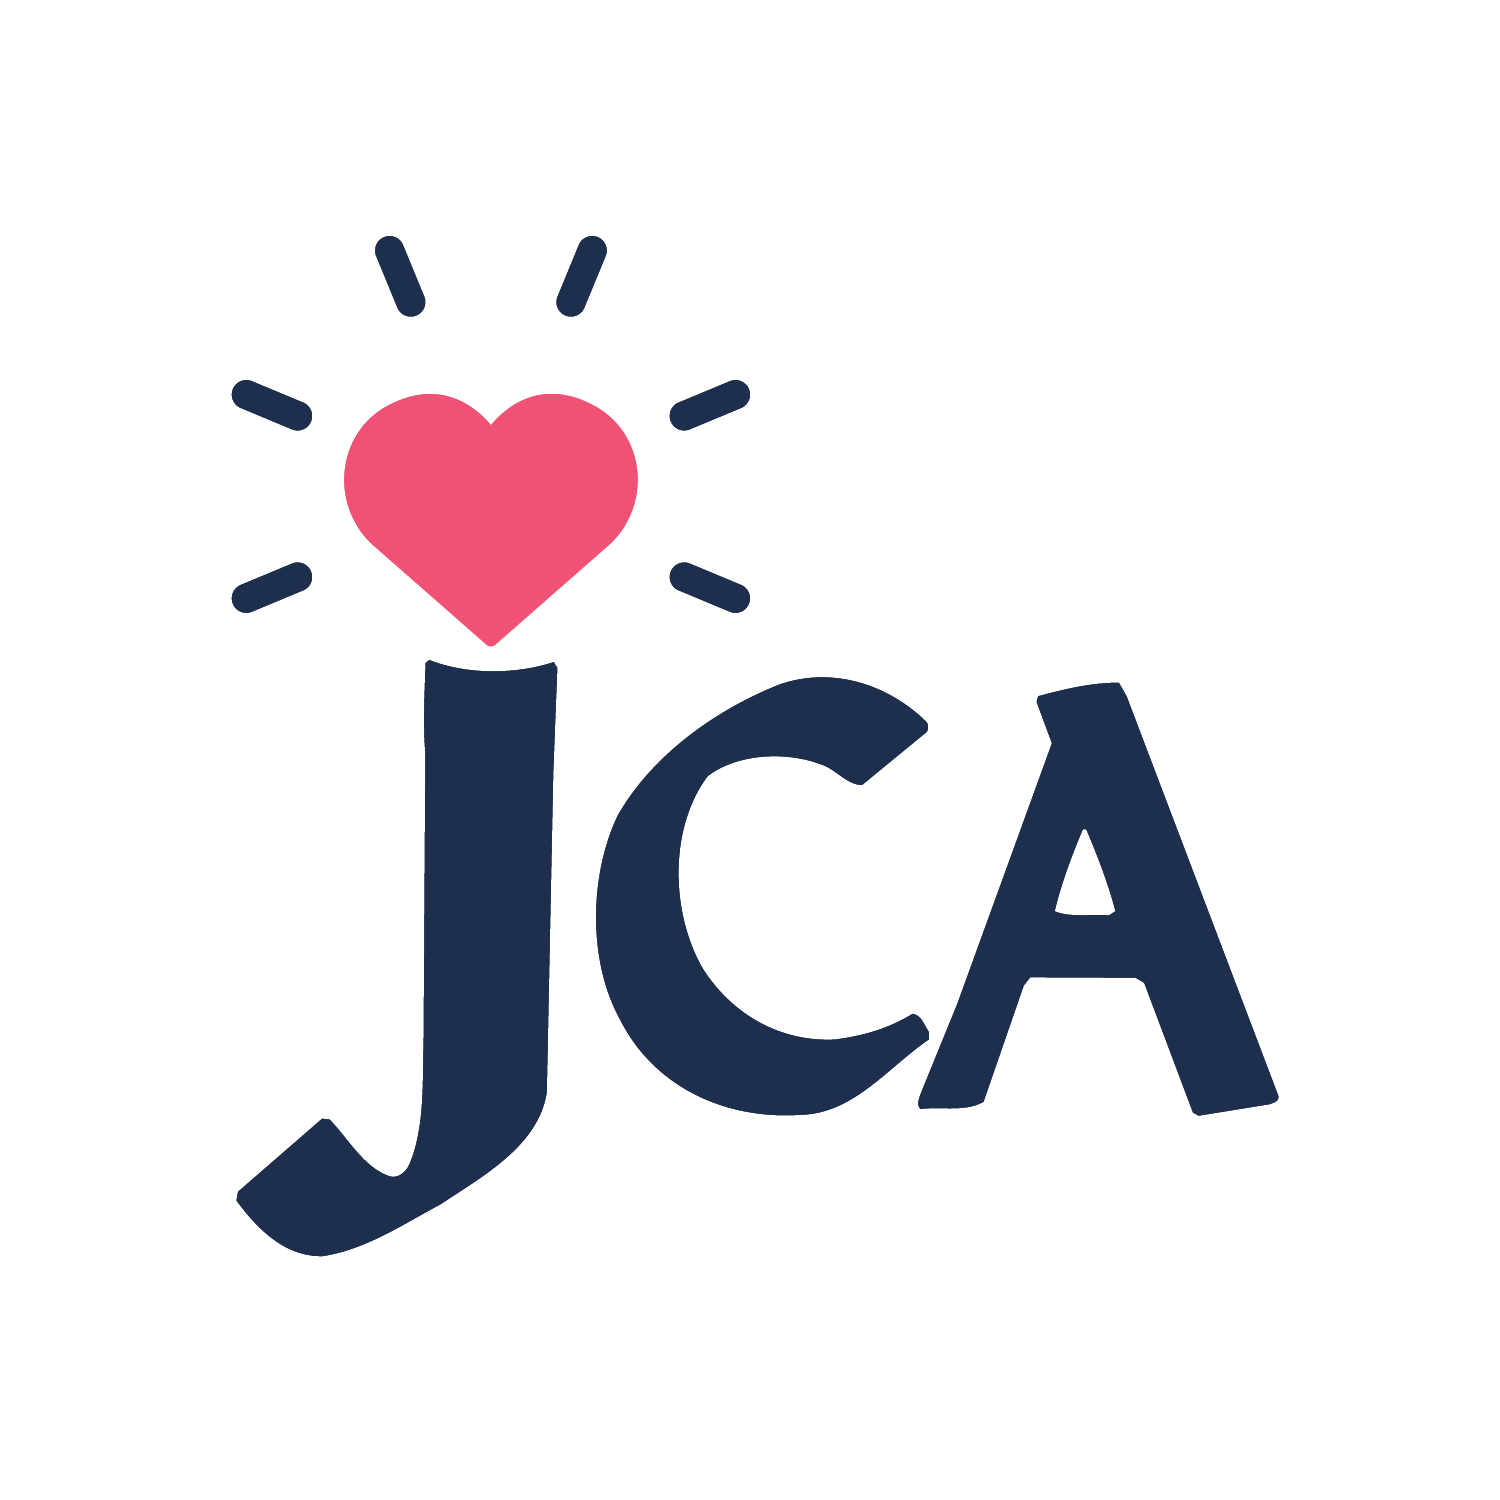 The jca logo with a heart in the middle.